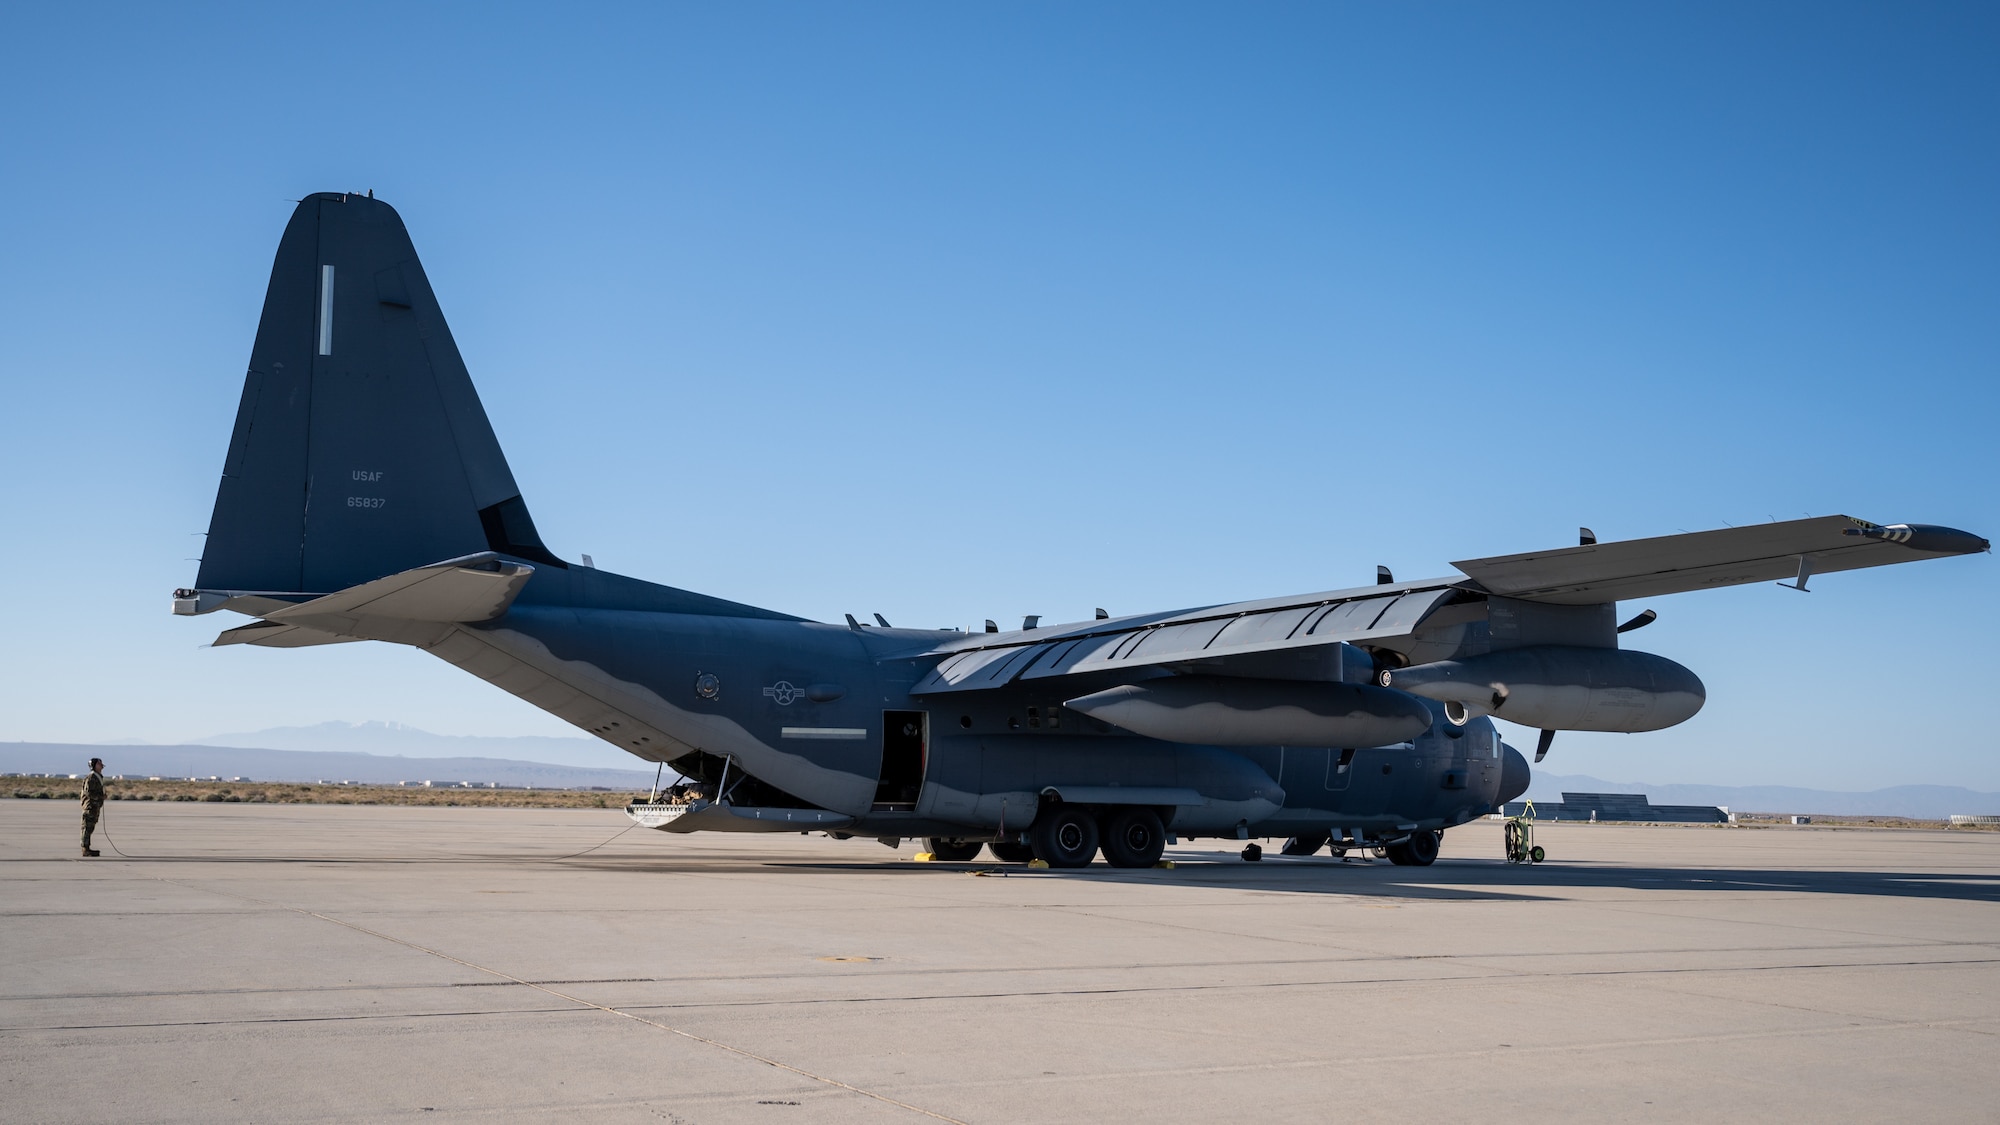 An AC-130J Ghostrider assigned to the 1st Special Operations Wing from Hurlburt Field, Fla., prepares to depart Edwards Air Force Base, California, April 14. The aircraft recently underwent electronic weapons countermeasures testing at the Benefield Anechoic Facility. (Air Force photo by Giancarlo Casem)